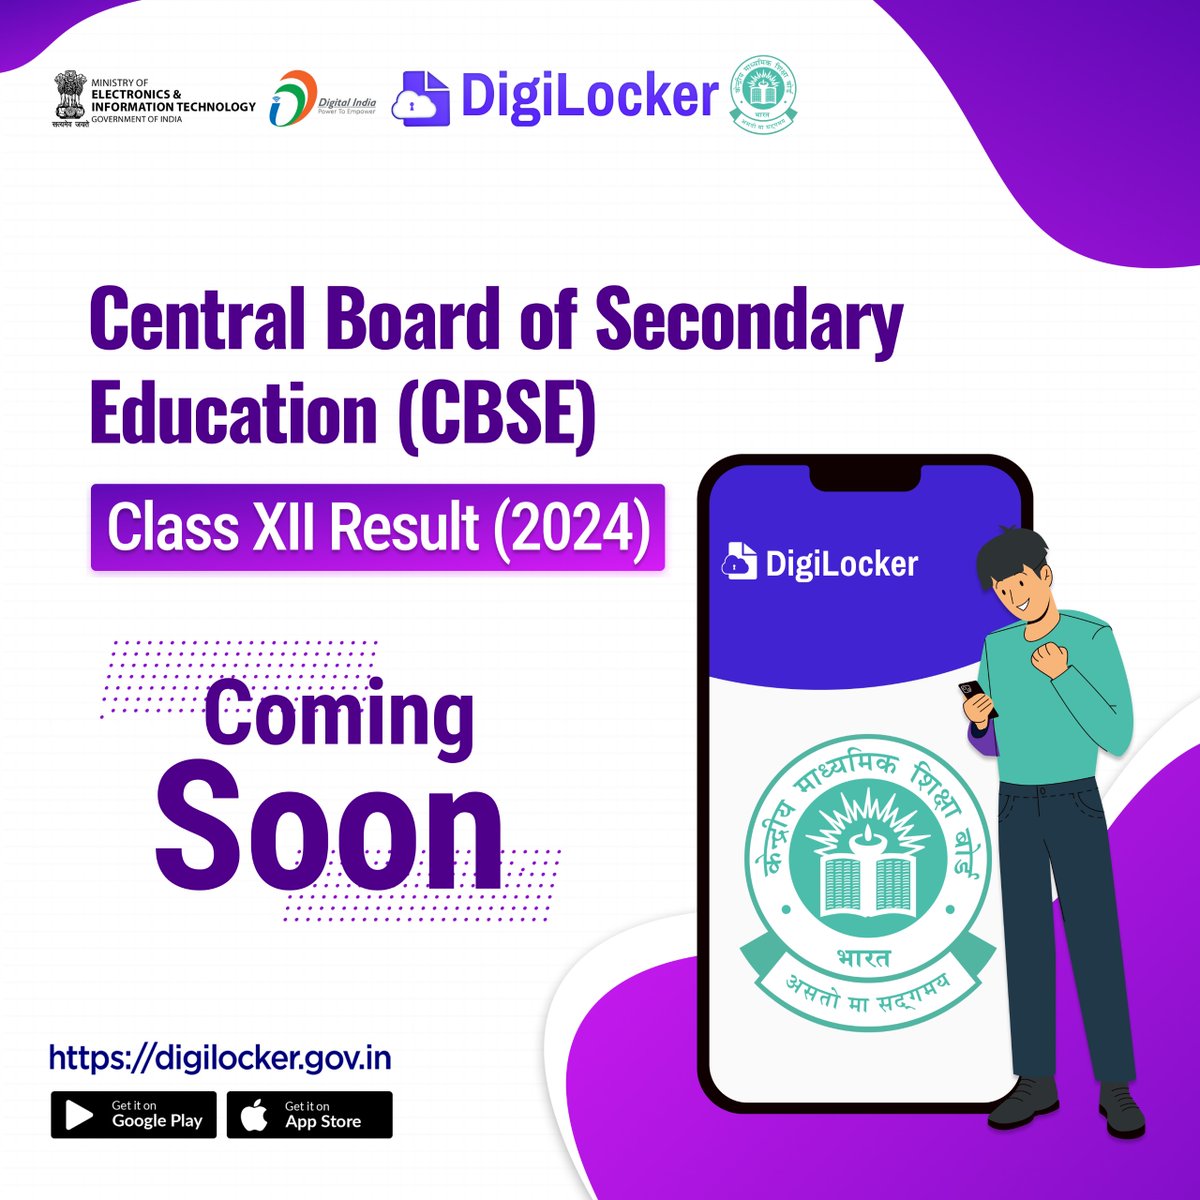 Big news! CBSE Class XII Results will soon be available on #DigiLocker Result Page. Stay tuned for hassle-free access to your results. Follow us for more updates and get ready to celebrate your achievements. cbseservices.digilocker.gov.in/activatecbse #CBSE #classXII #comingsoon #result2024